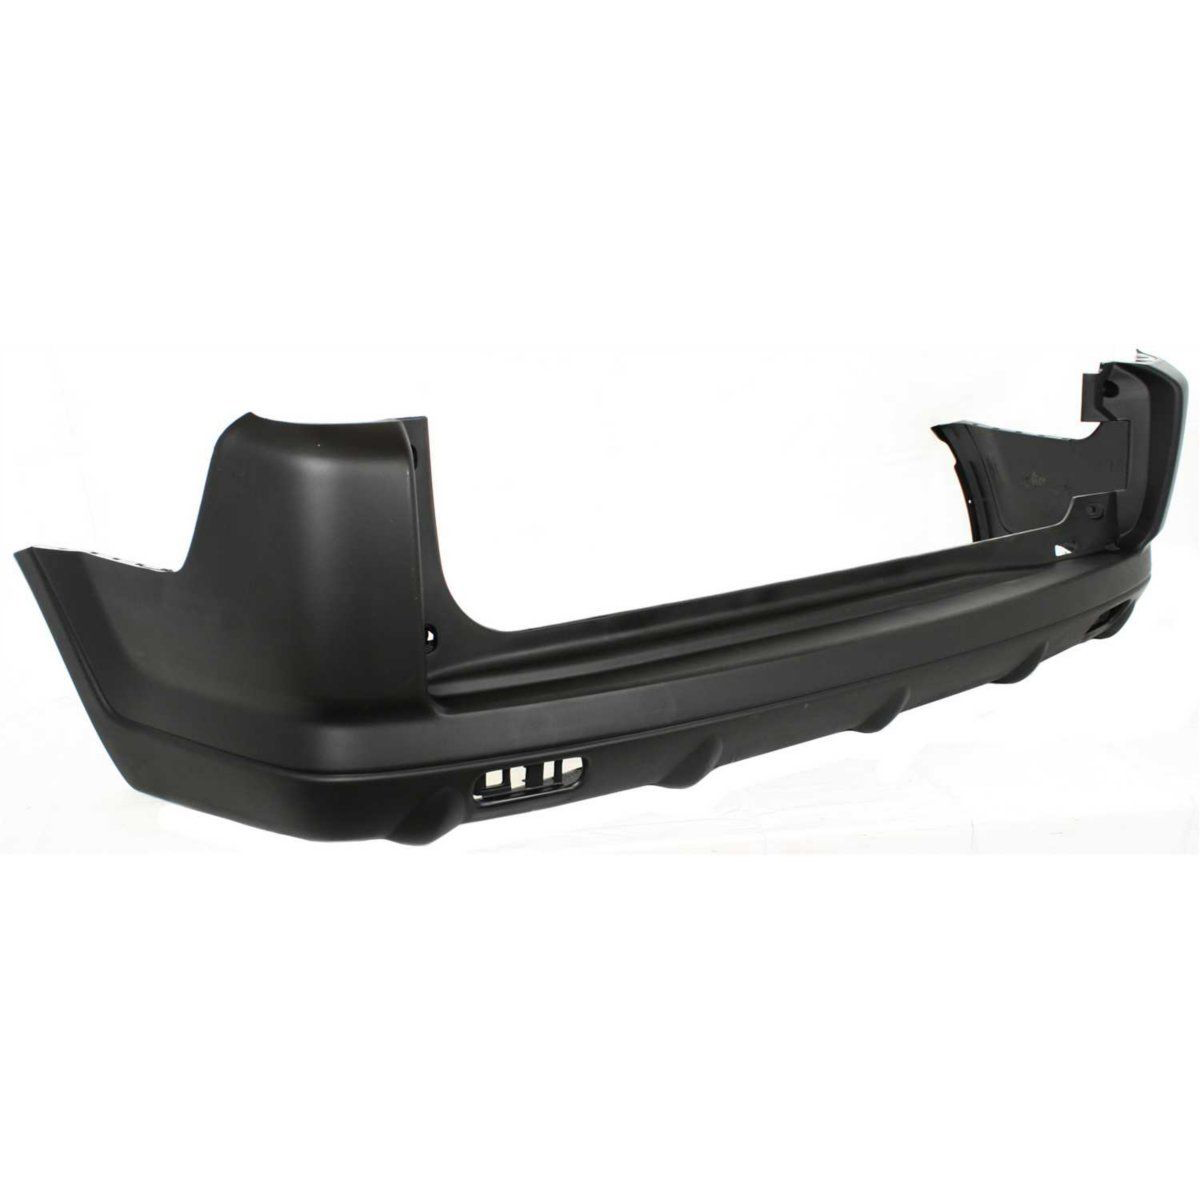 2002-2004 HONDA CR-V Rear Bumper Cover matte-gray/black  grained finish  USA market Painted to Match